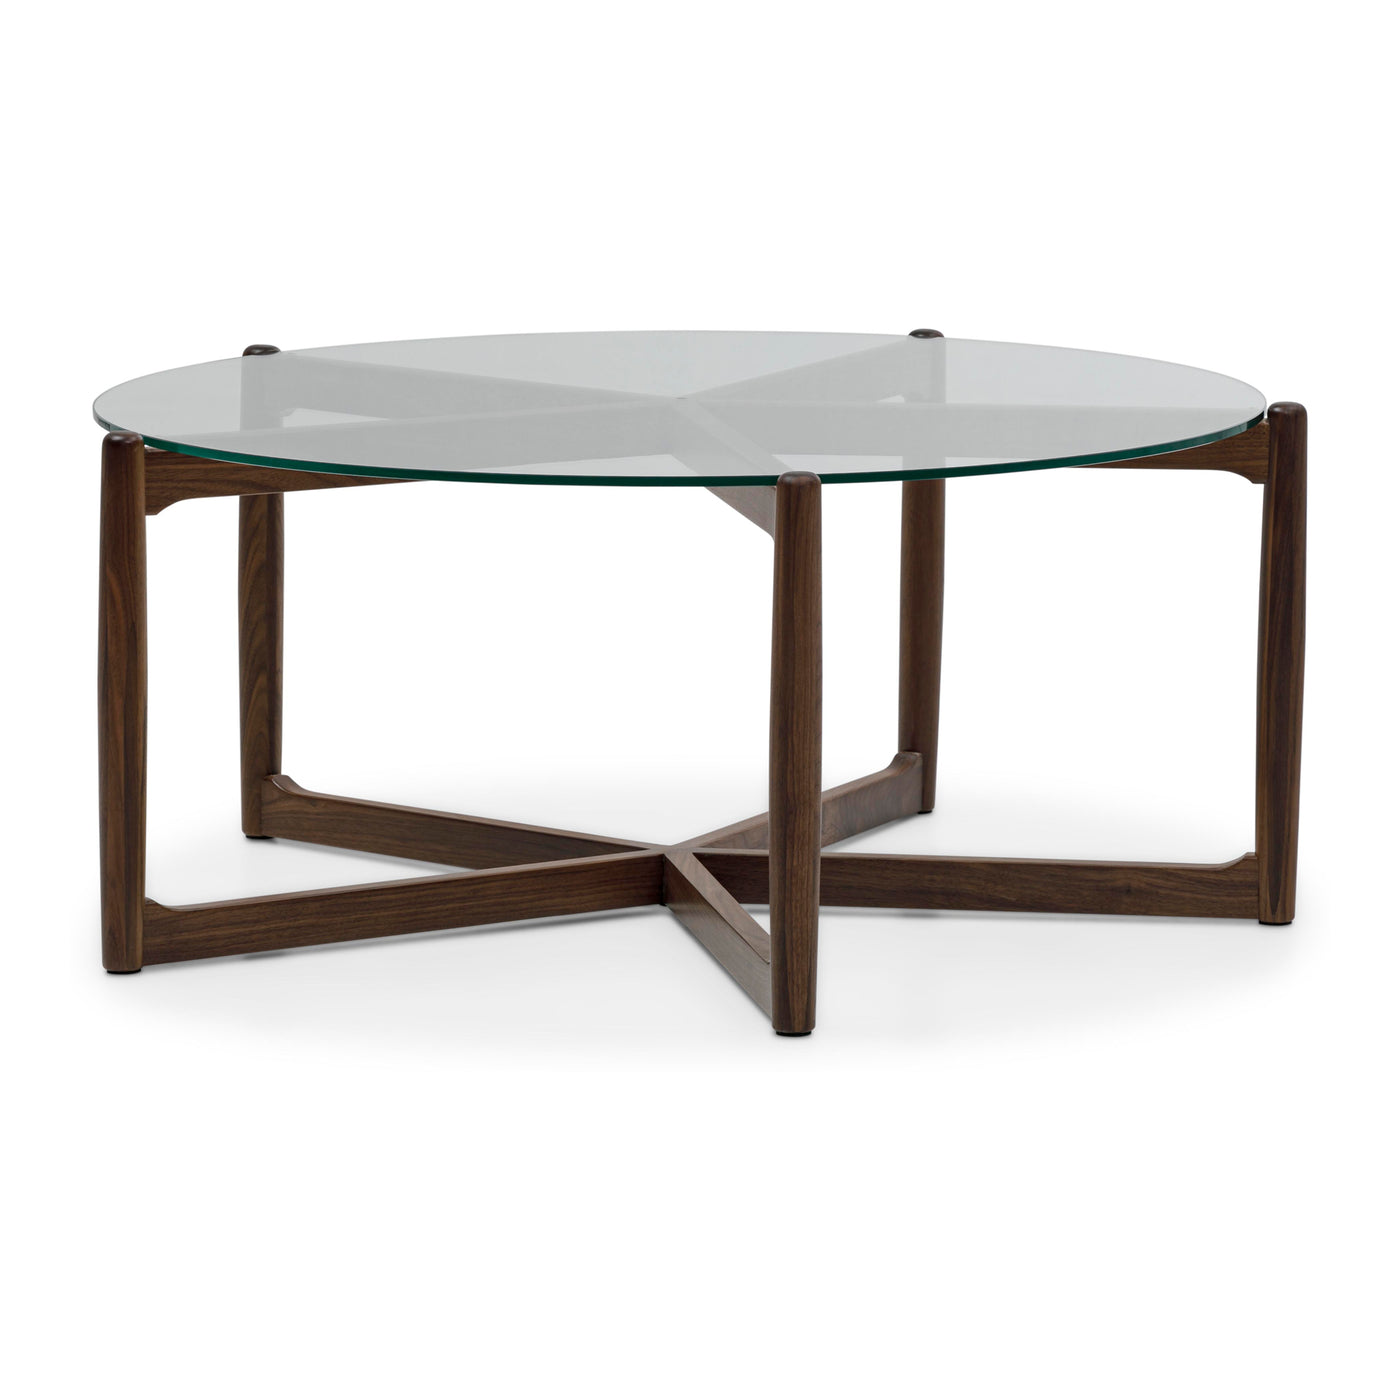 Slender and serene, the Hetta coffee tables circular shape will create a calming flow in your space. Its five-pointed bas...